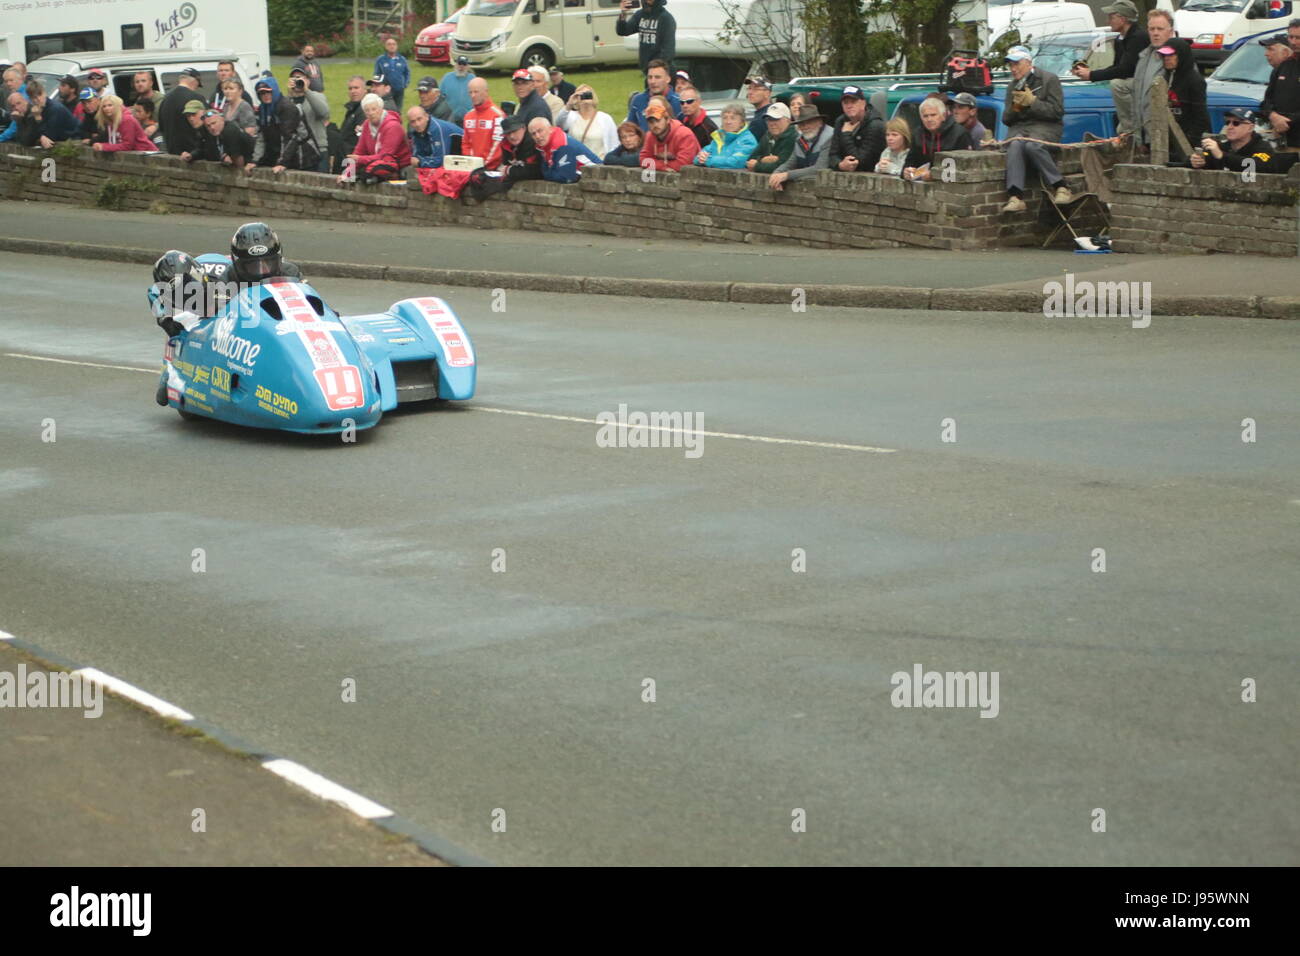 Ramsey, UK. 5th Jun, 2017. Isle of Man TT Races, Sure Sidecar Race. Number 11, Tony Baker and Fiona Baker-Holden on their 600cc Baker Suzuki sidecar from the Silicone Engineering and Carl Cox Motorsport team at Cruickshanks Corner, Ramsey, Isle of Man. Credit: Louisa Jane Bawden/Alamy Live News. Stock Photo